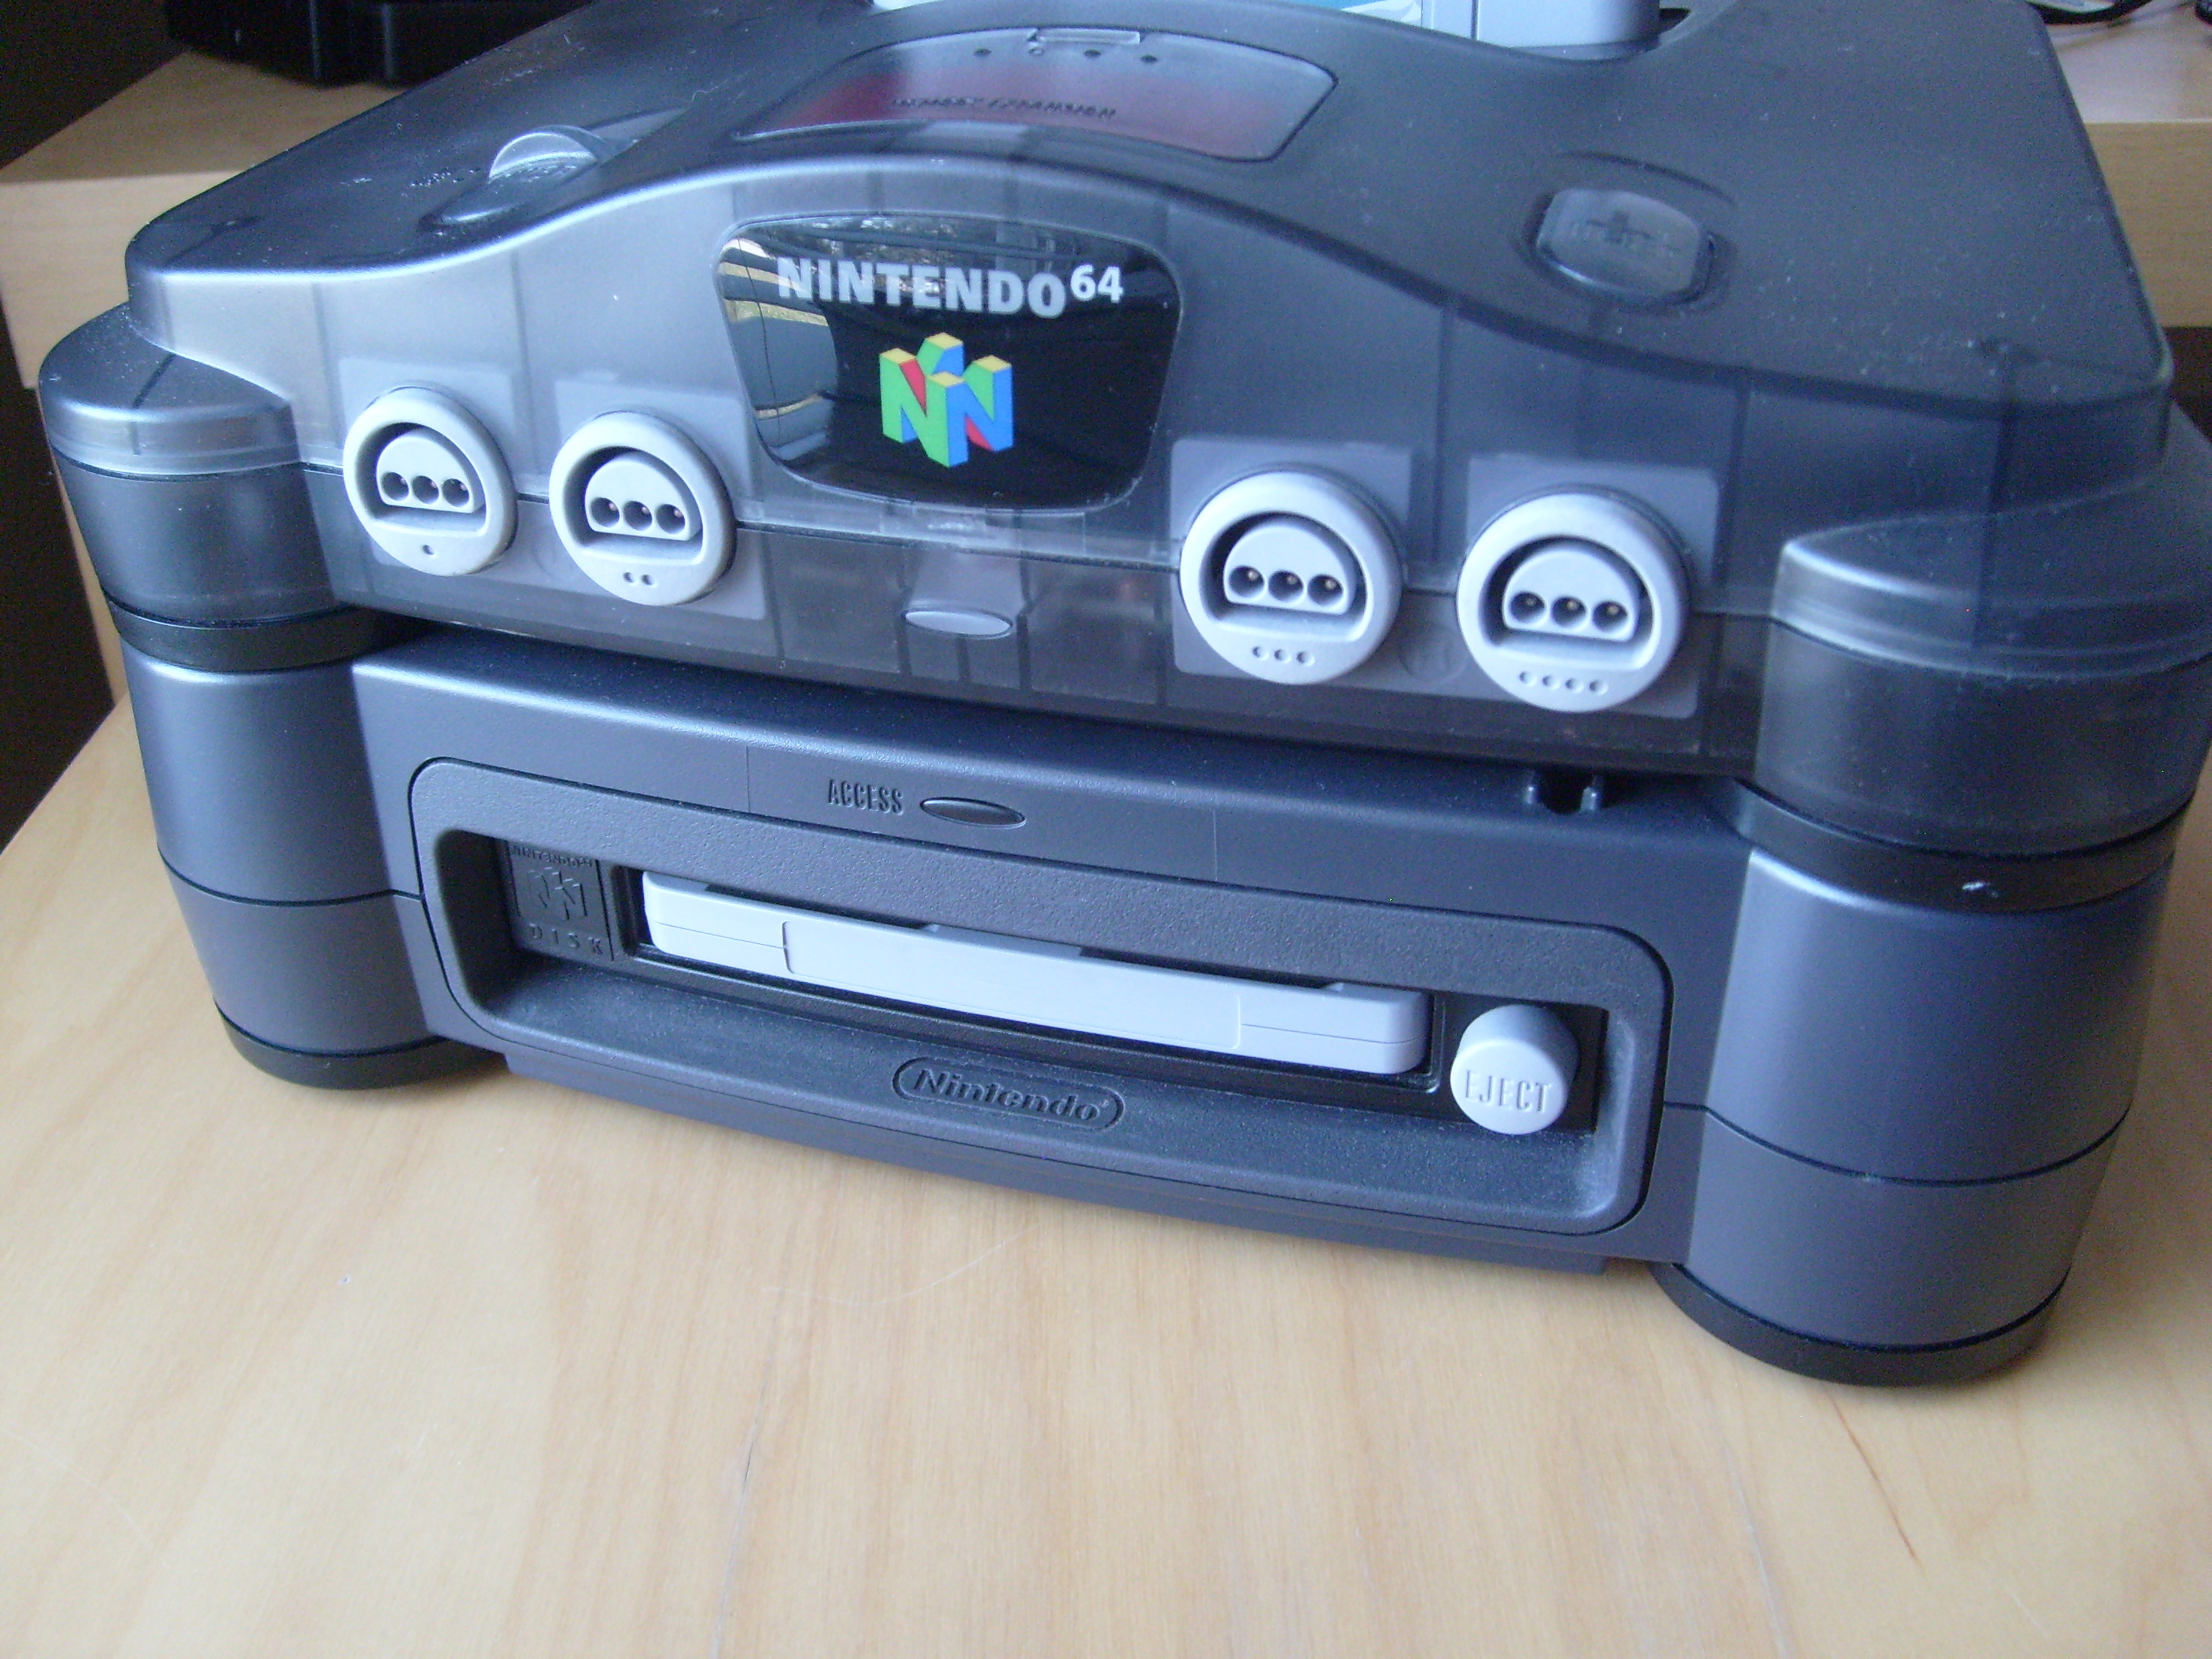 N64 Games and Hardware You Didn't Know About